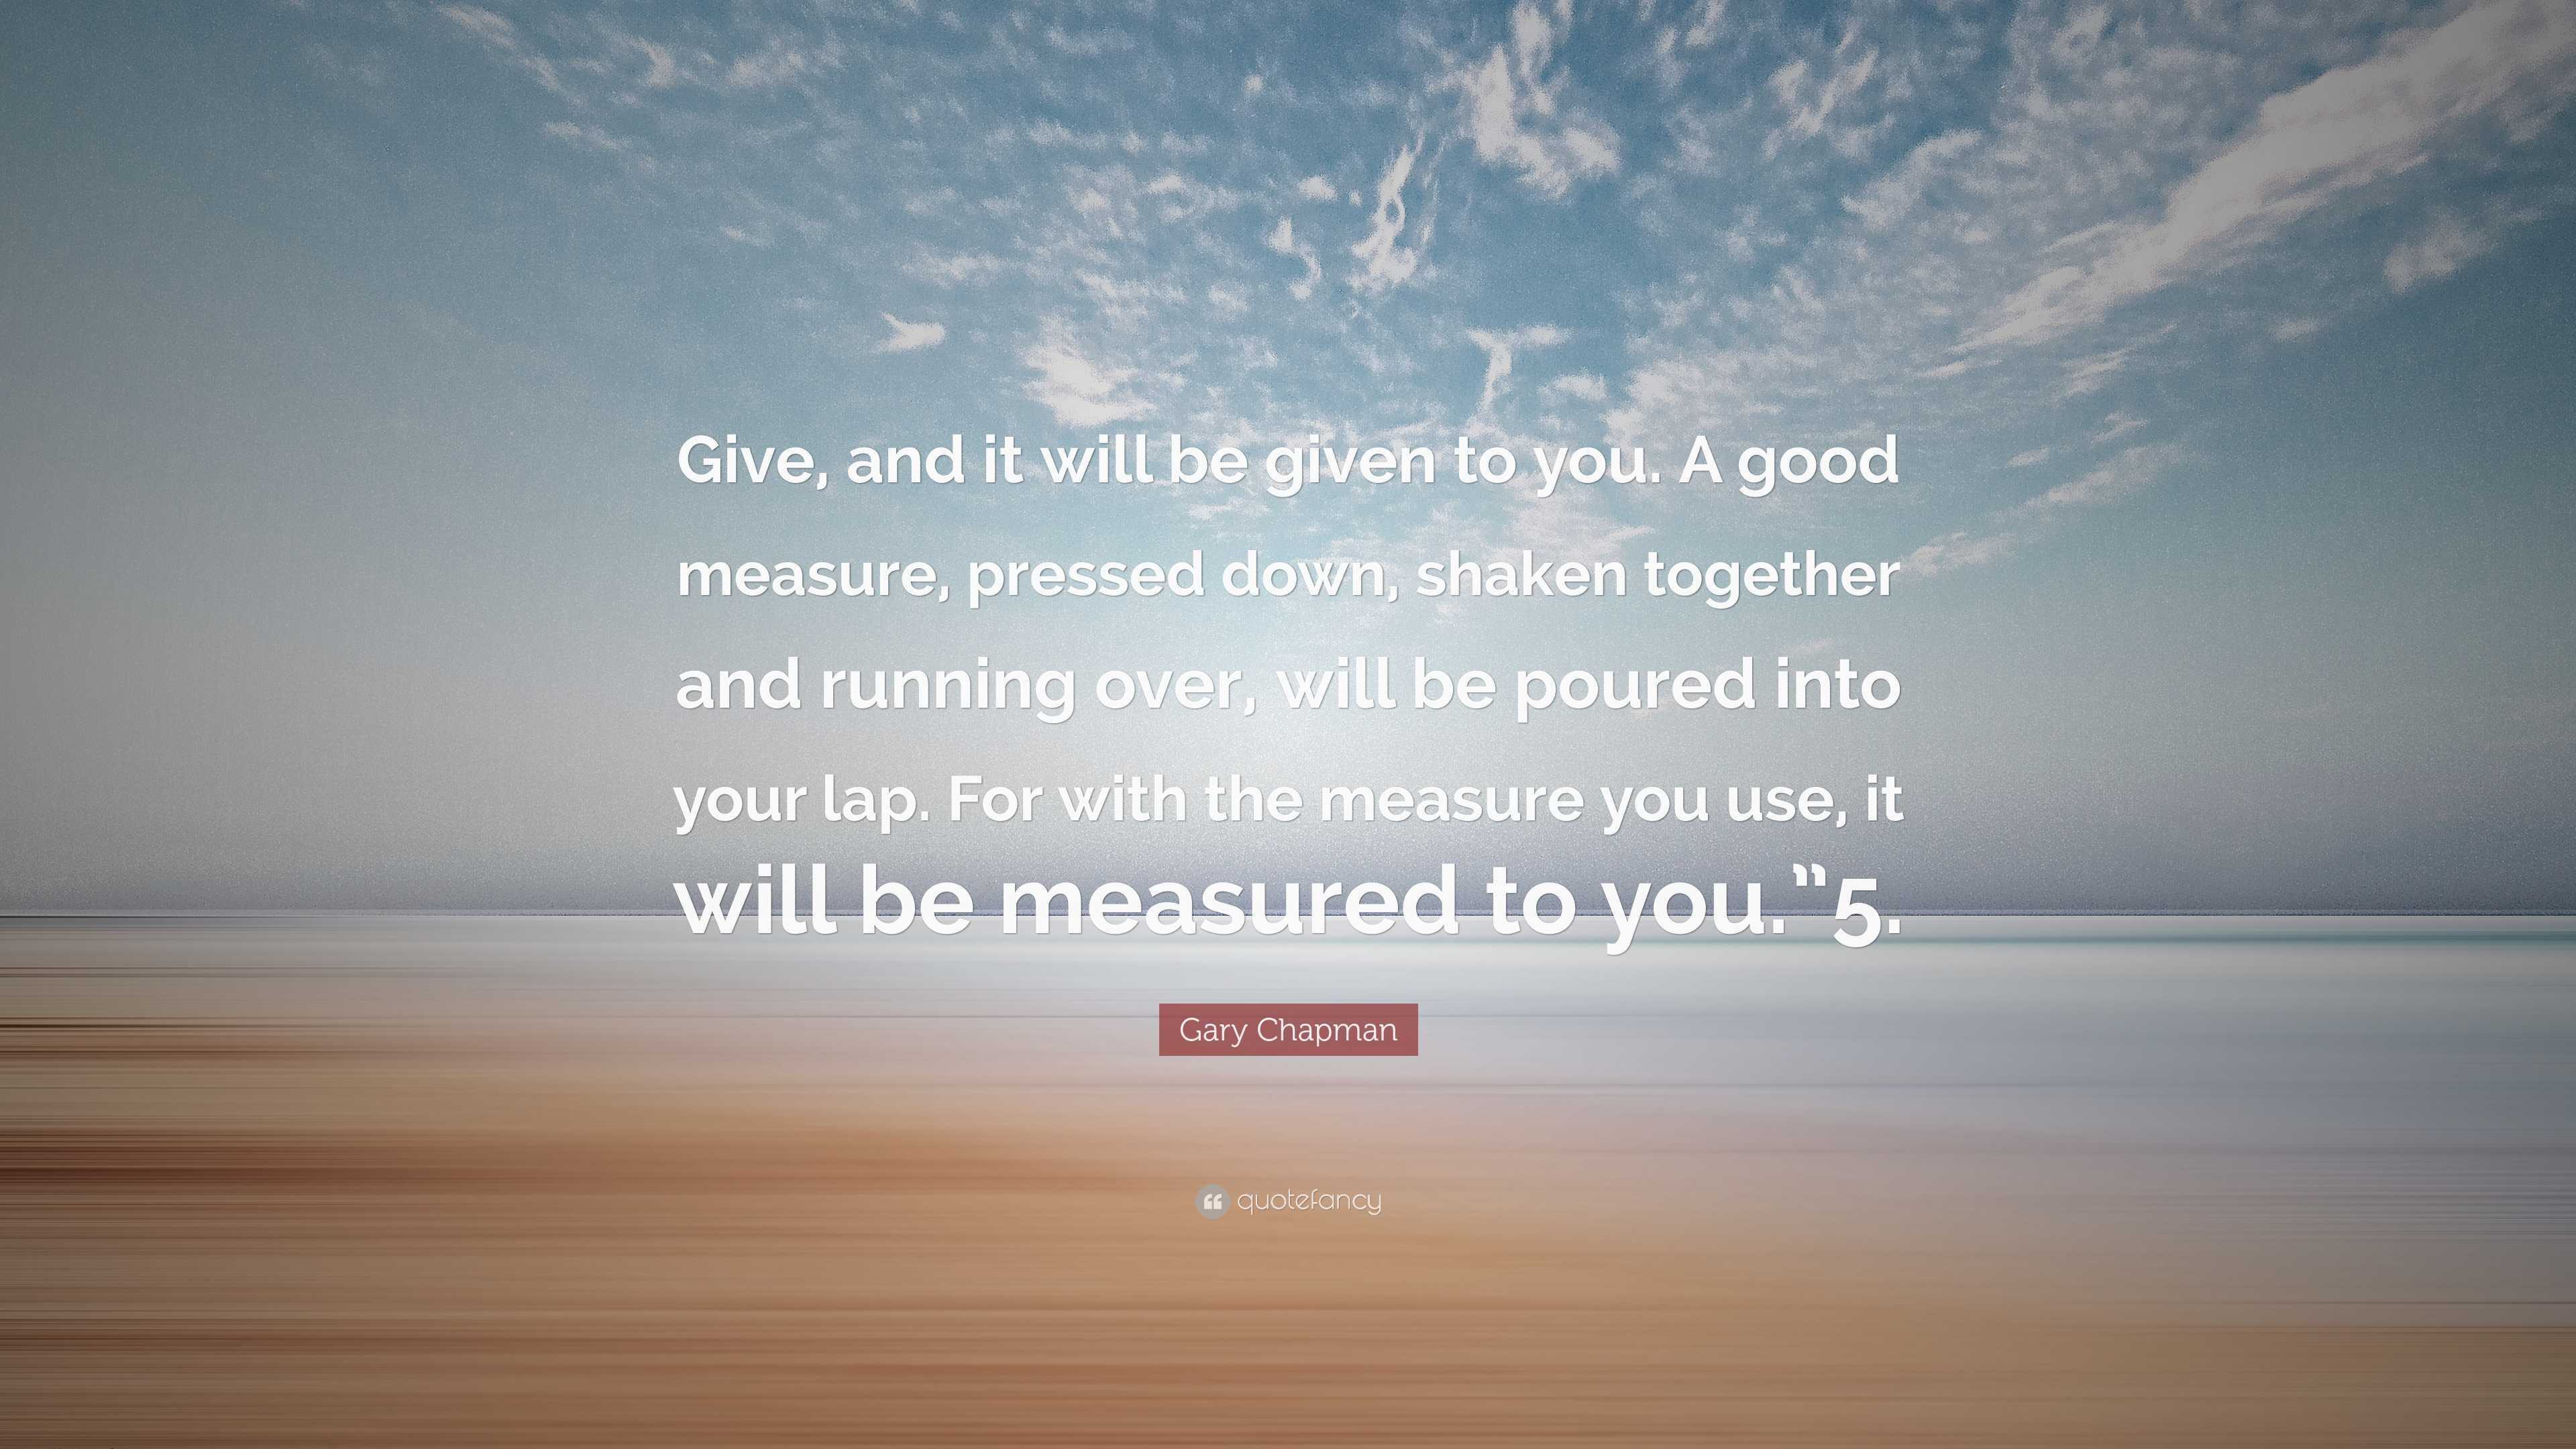 Gary Chapman Quote: “Give, and it will be given to you. A good measure,  pressed down, shaken together and running over, will be poured into y”